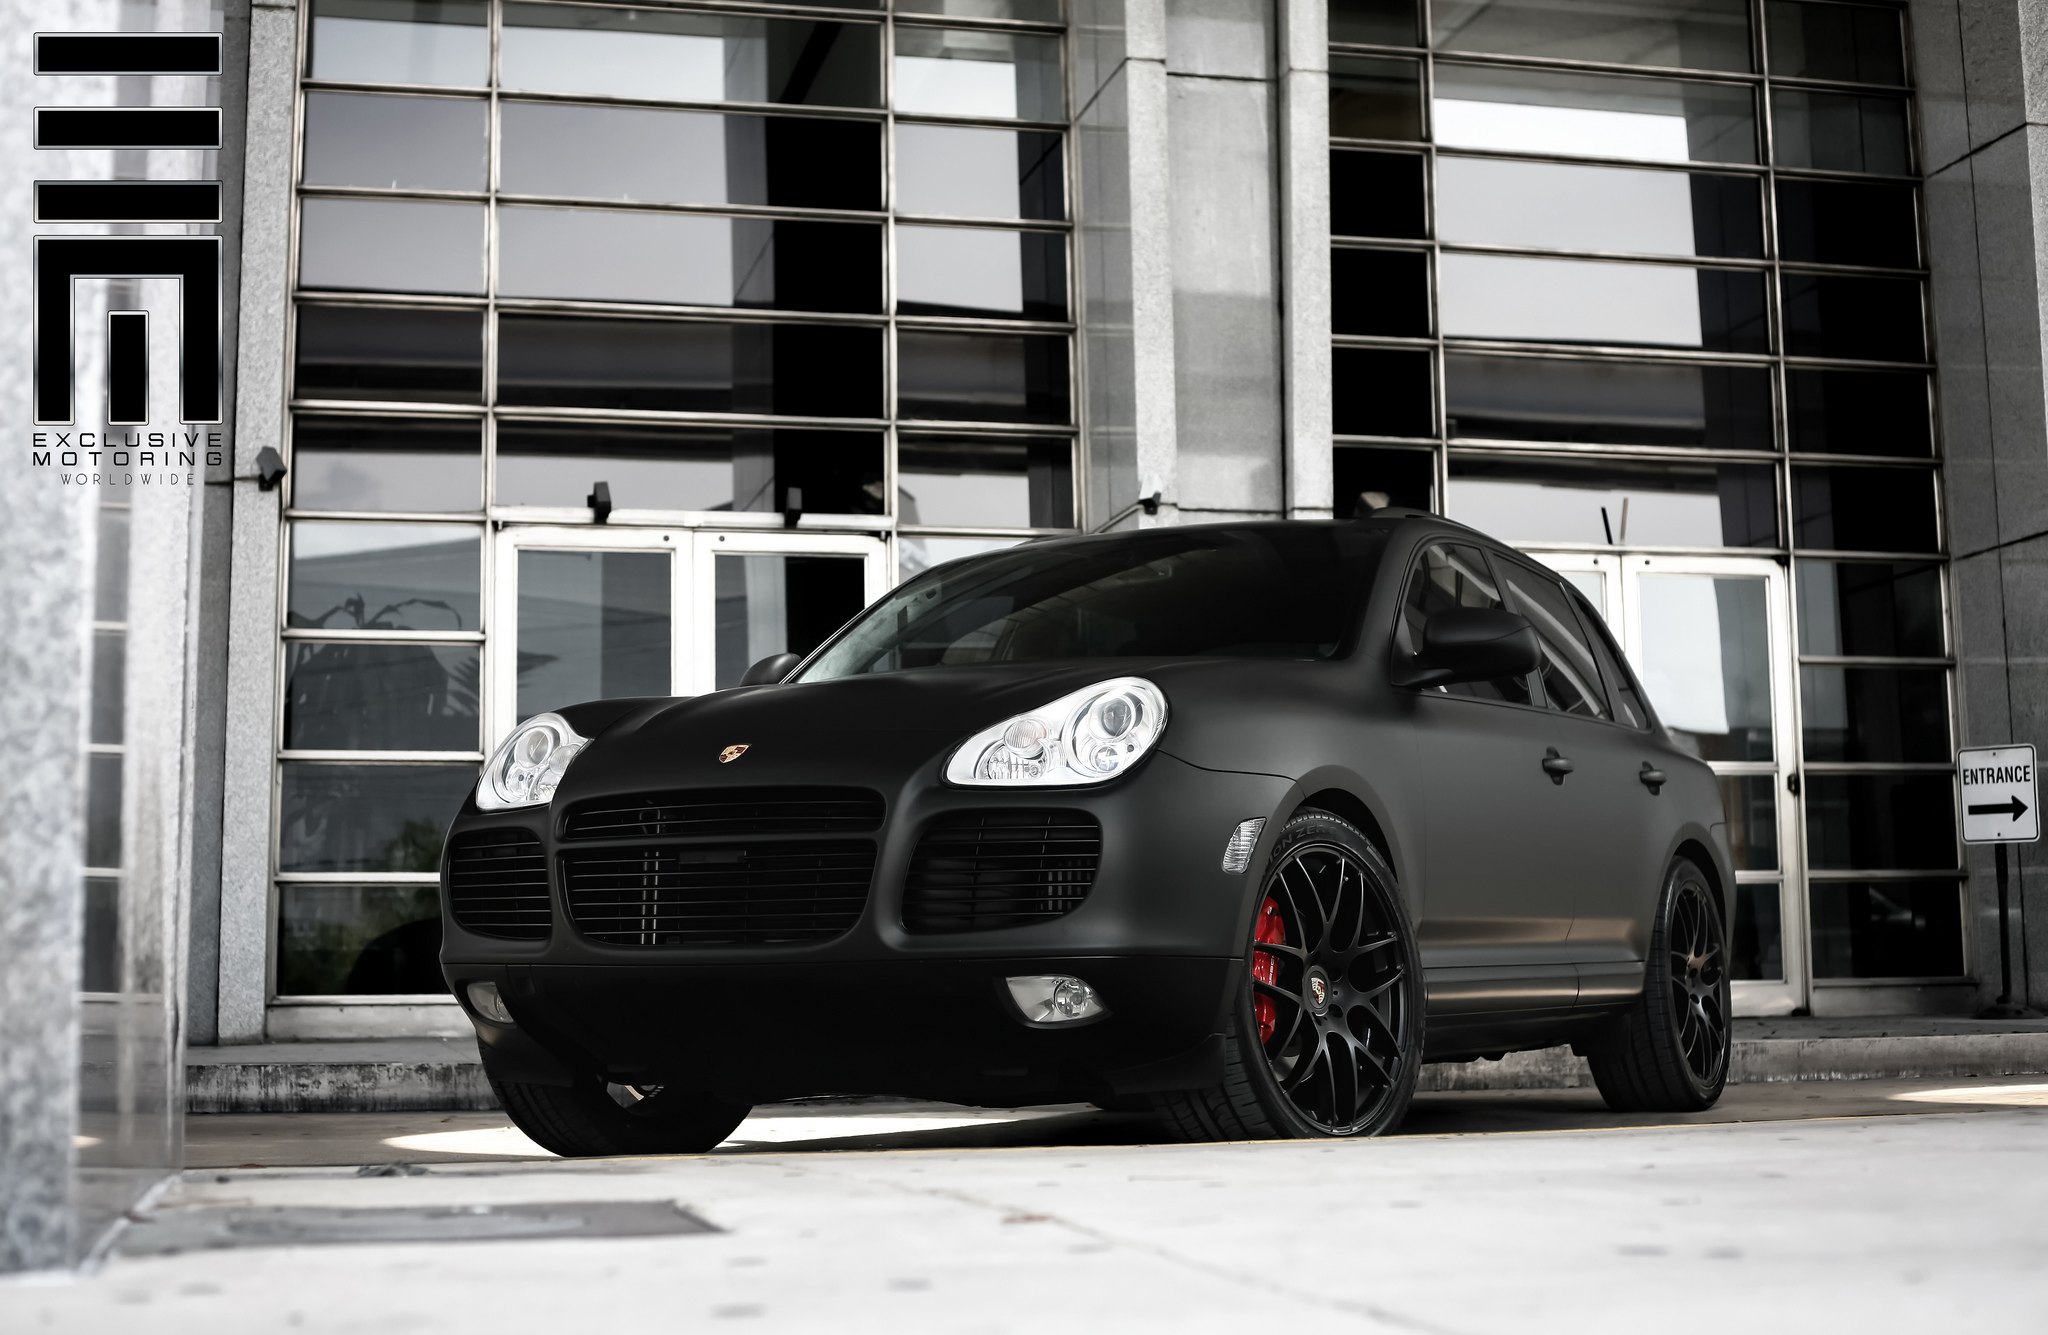 Sinister Porsche Cayenne Turbo - Photo by Exclusive Motoring